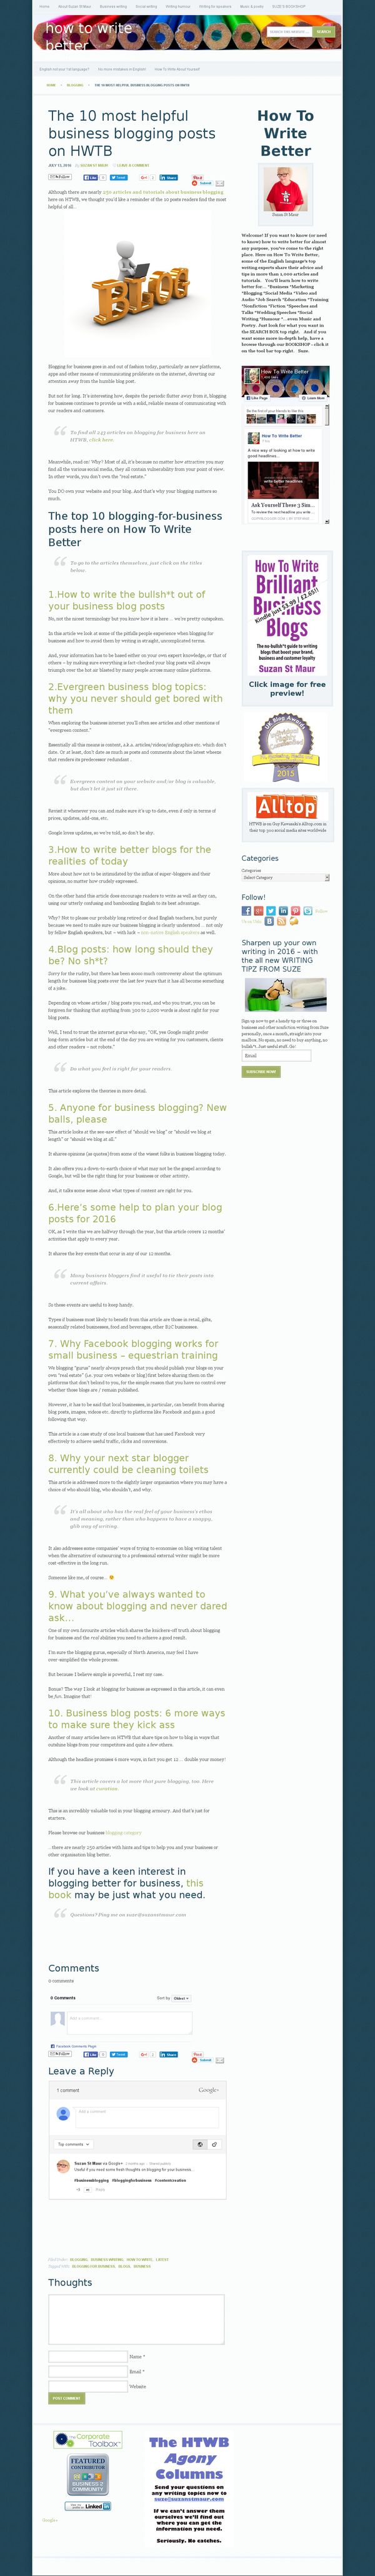 10 most helpful business blogging posts ever on HTWB | How To Write Better